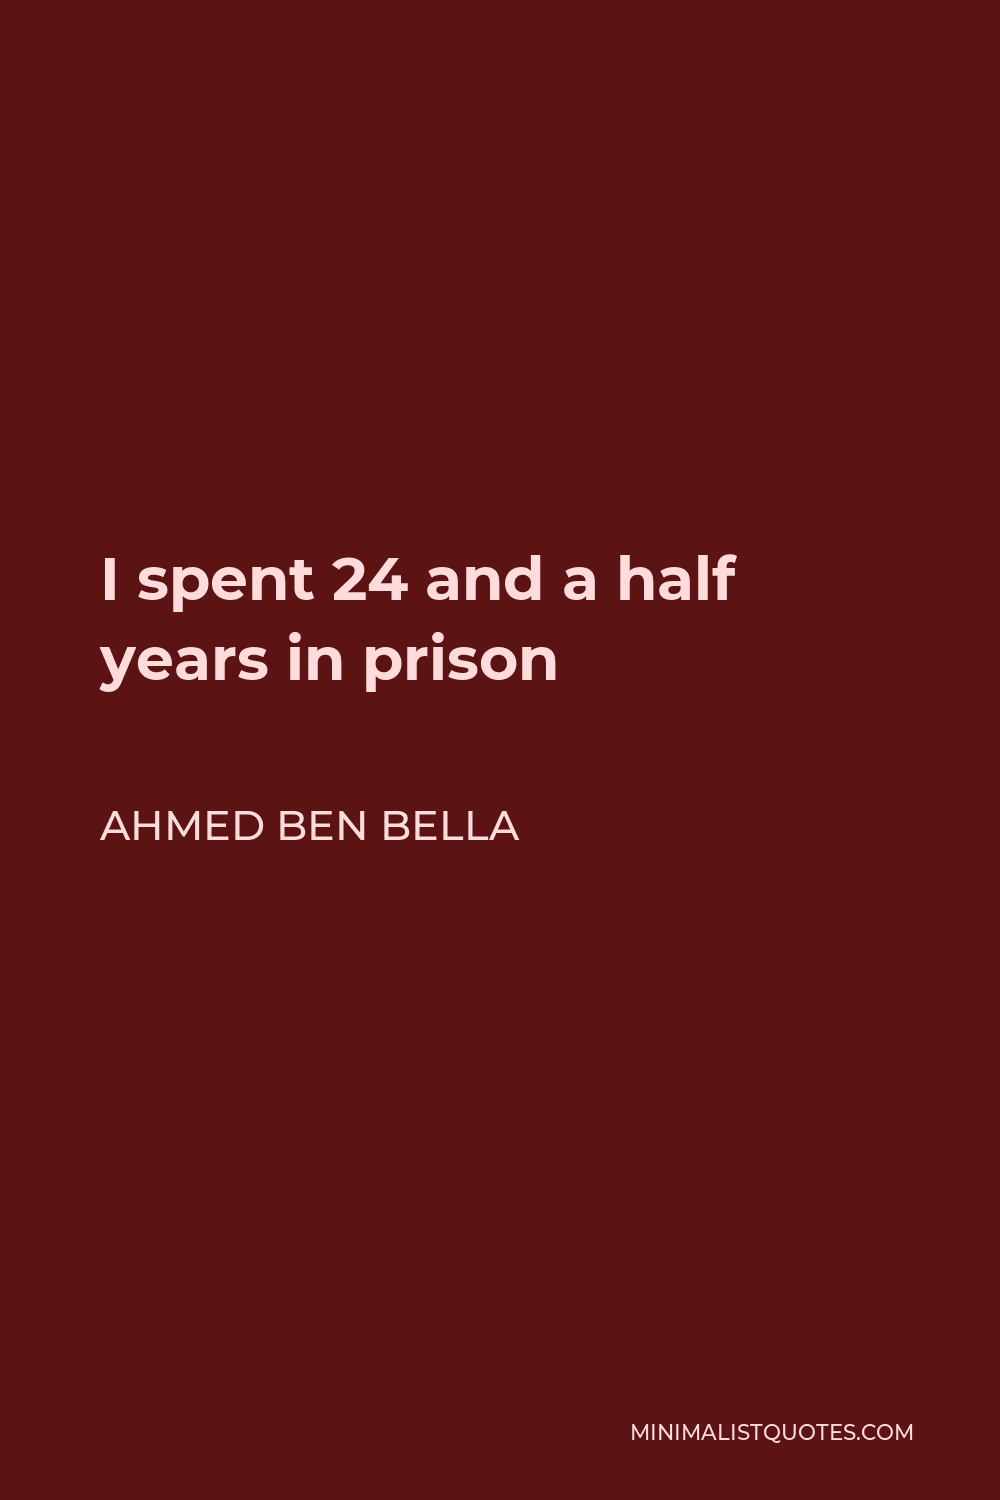 Ahmed Ben Bella Quote - I spent 24 and a half years in prison